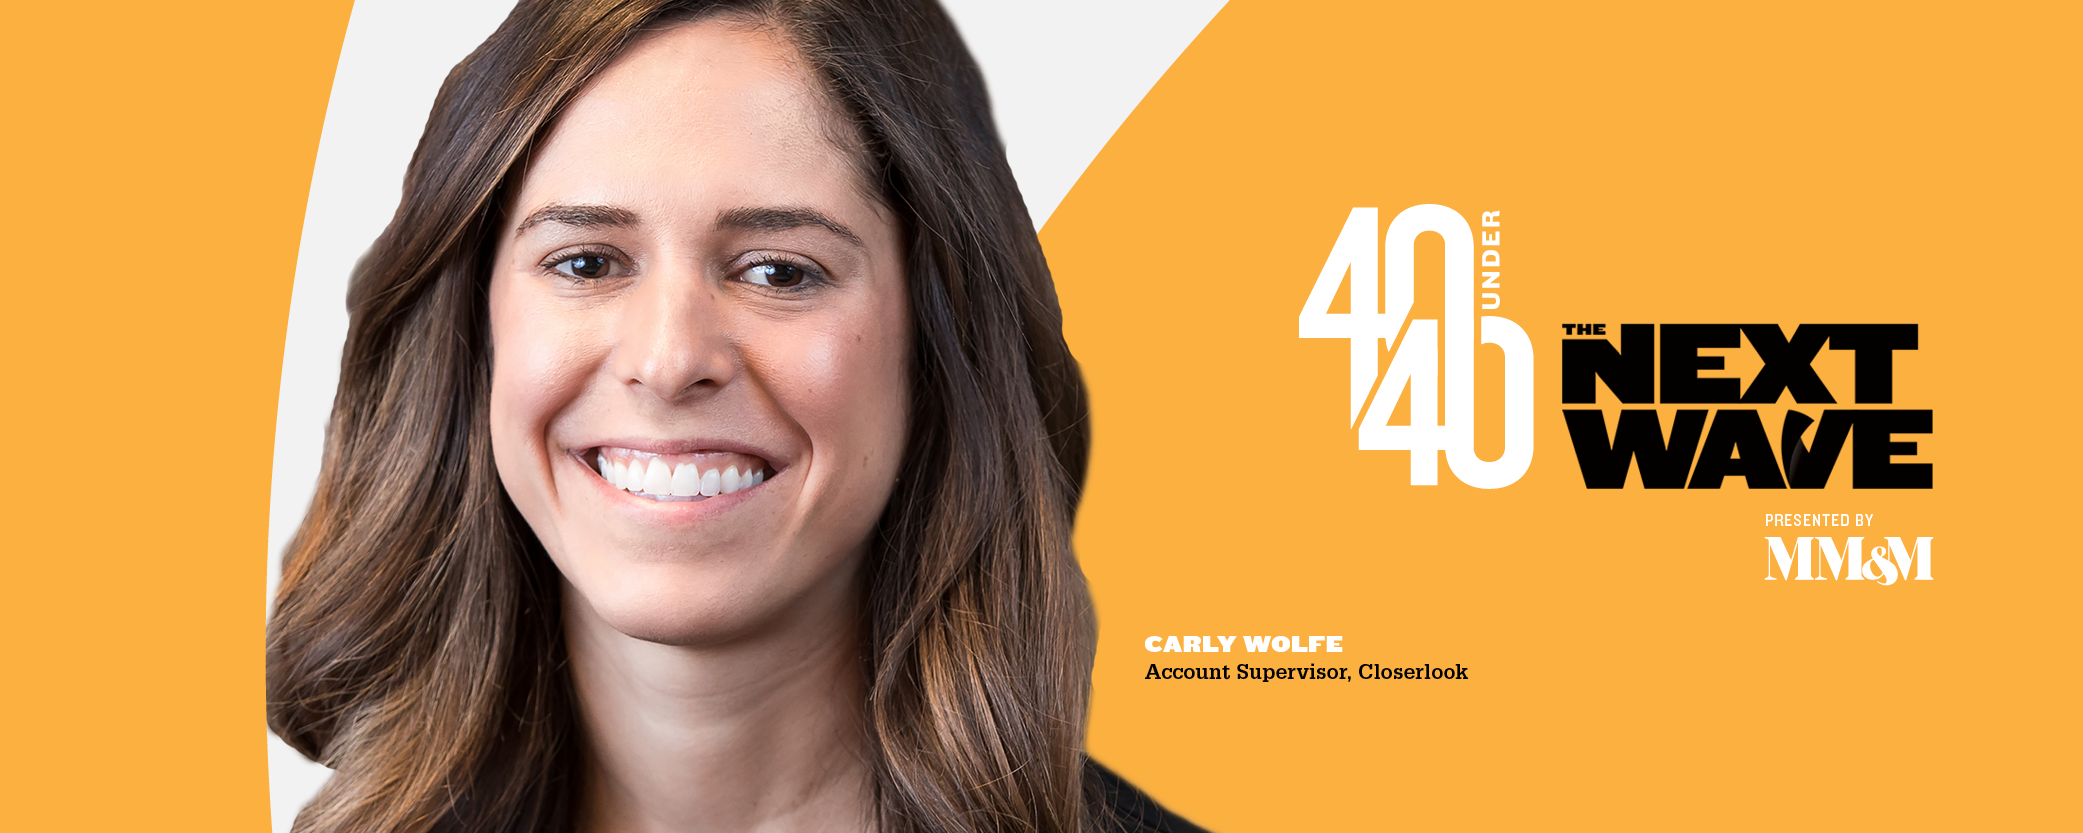 40 Under 40 2020: Carly Wolfe, Closerlook